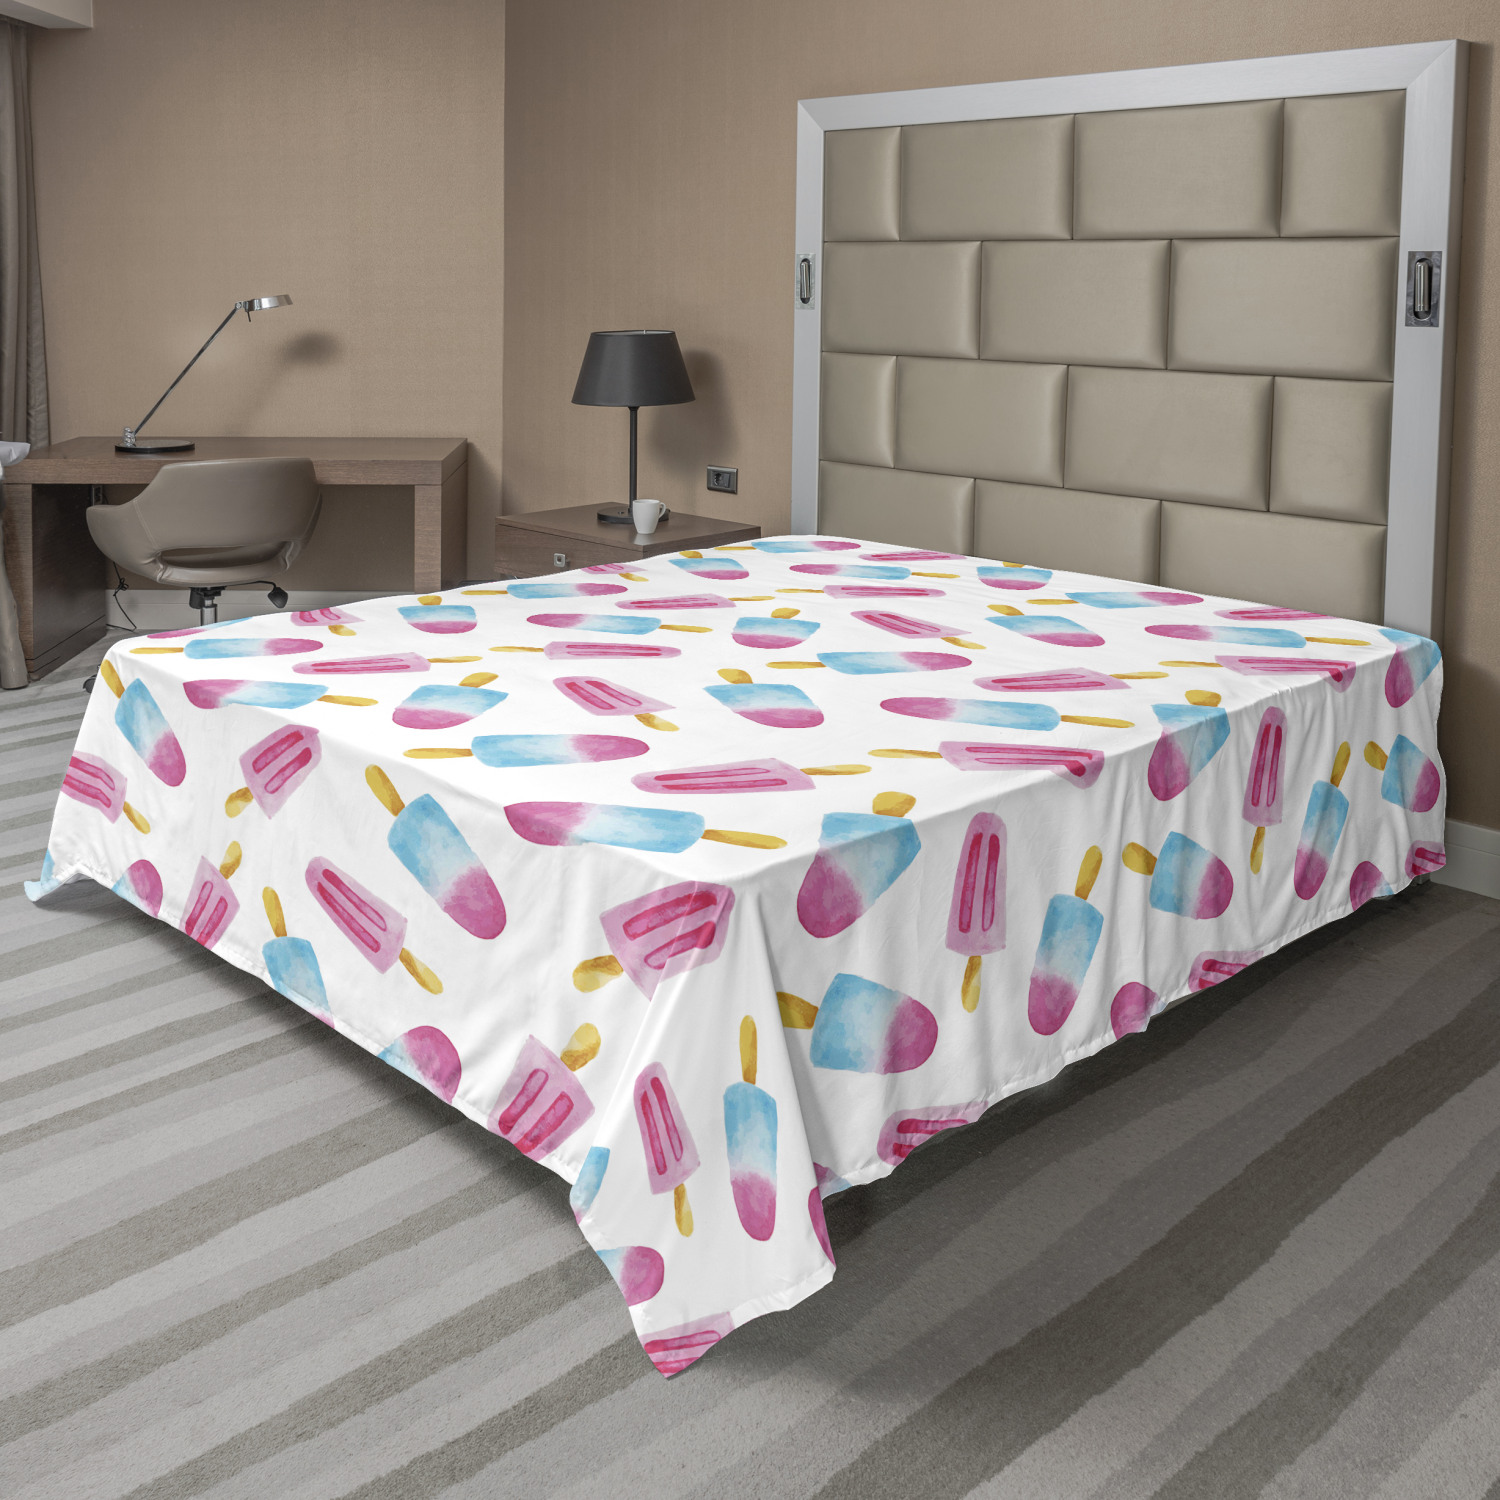 Details about   Ambesonne Ice Creams Flat Sheet Top Sheet Decorative Bedding 6 Sizes 